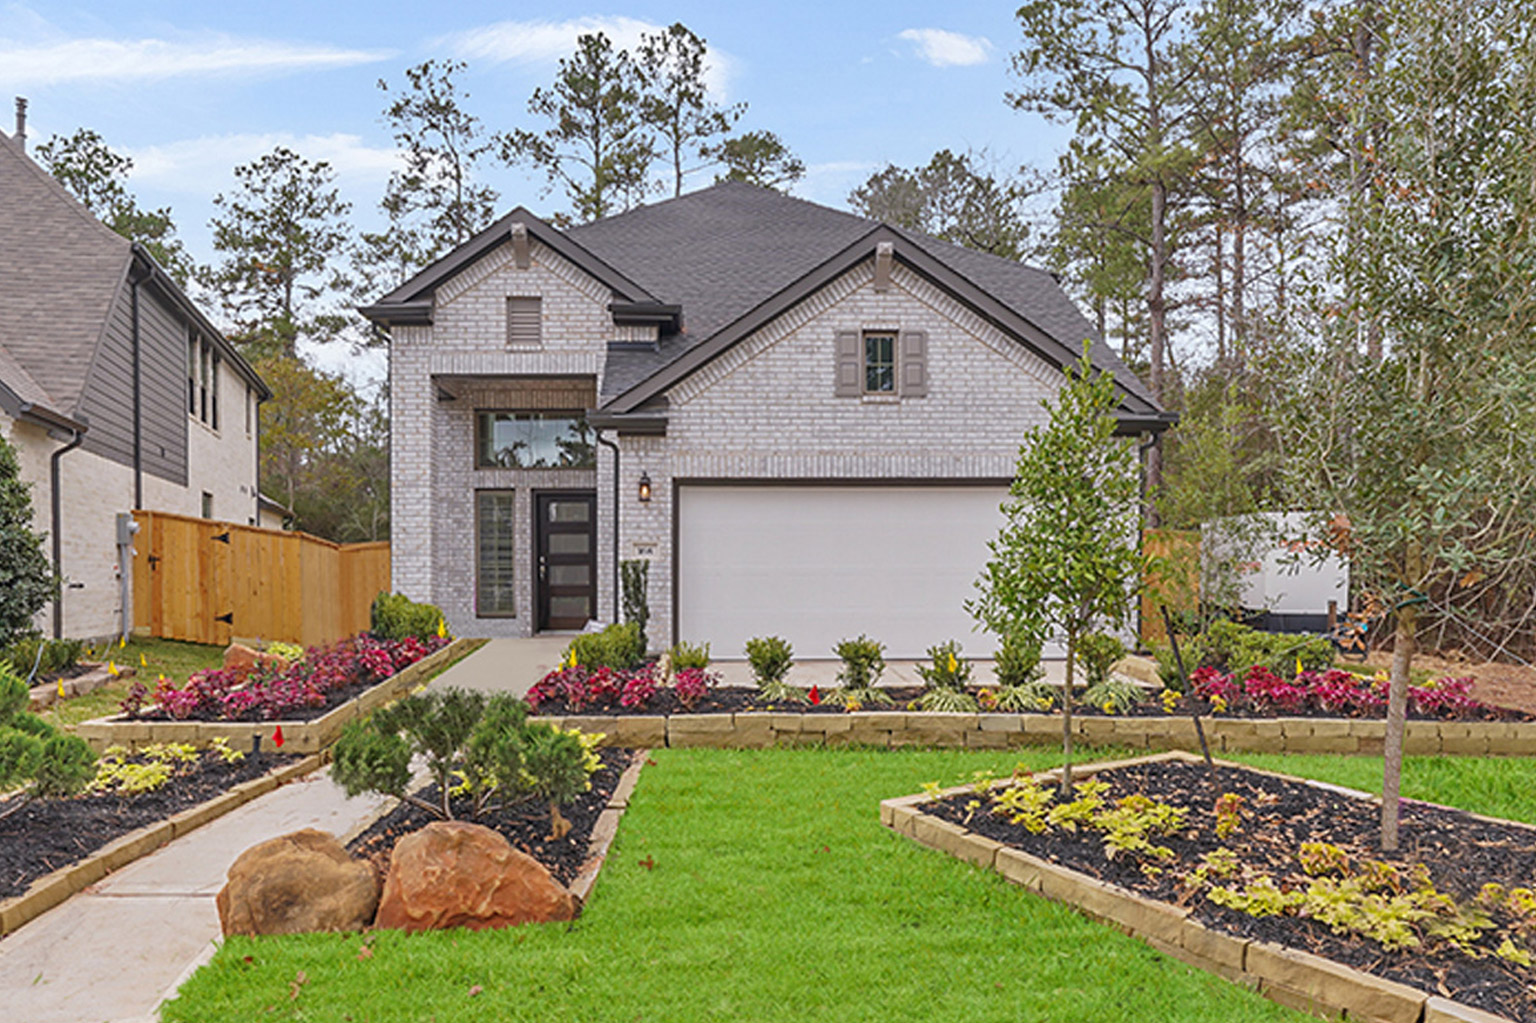 Builder Spotlight: Chesmar Homes Sets A Higher Standard With New Home Offerings in The Woodlands Hills